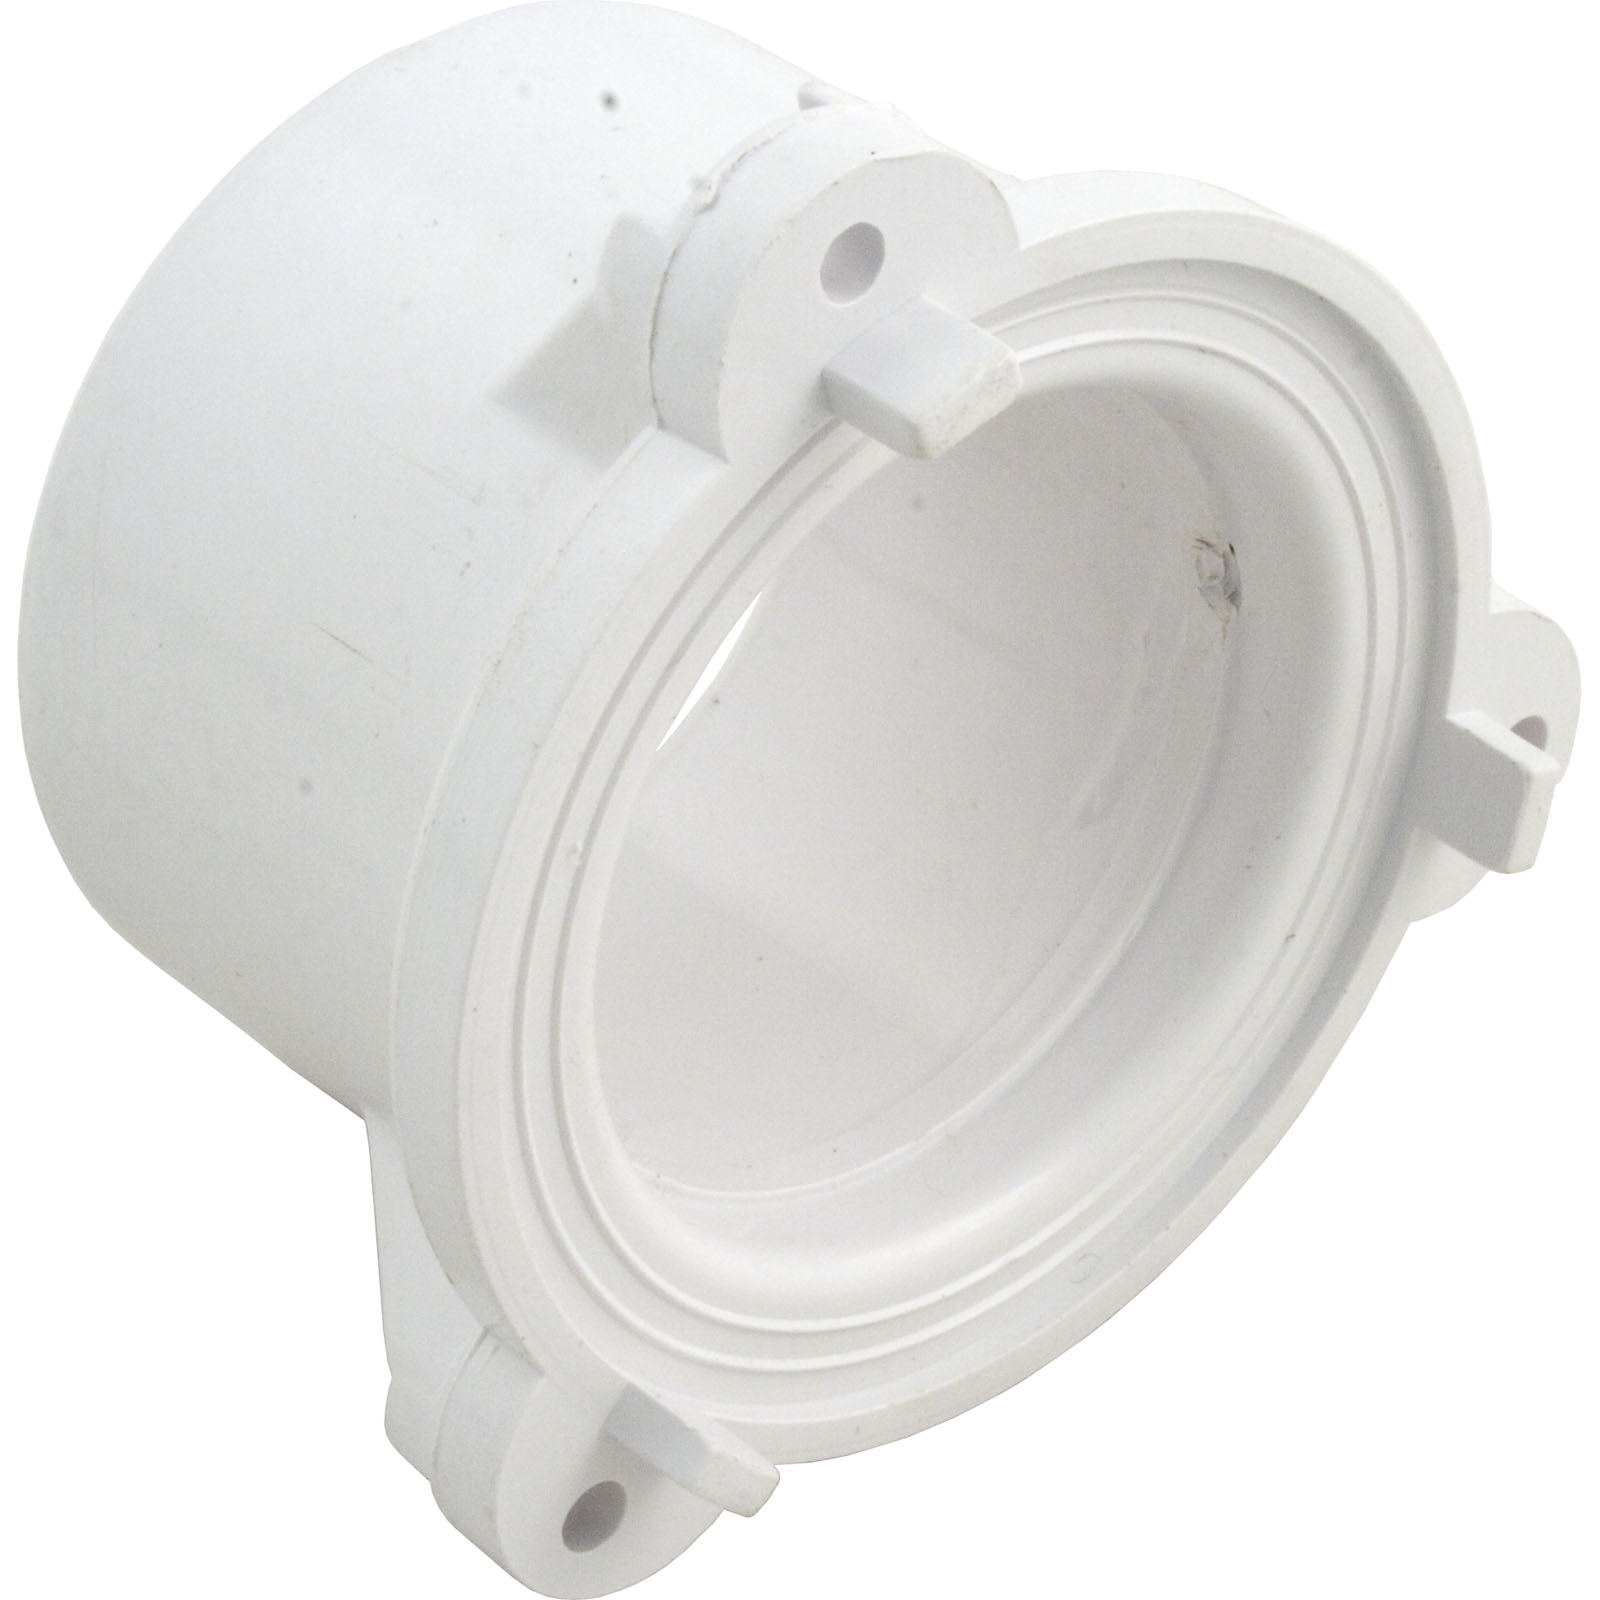 Picture of Sight Glass End Cap, Pentair, 1-1/2" Slip